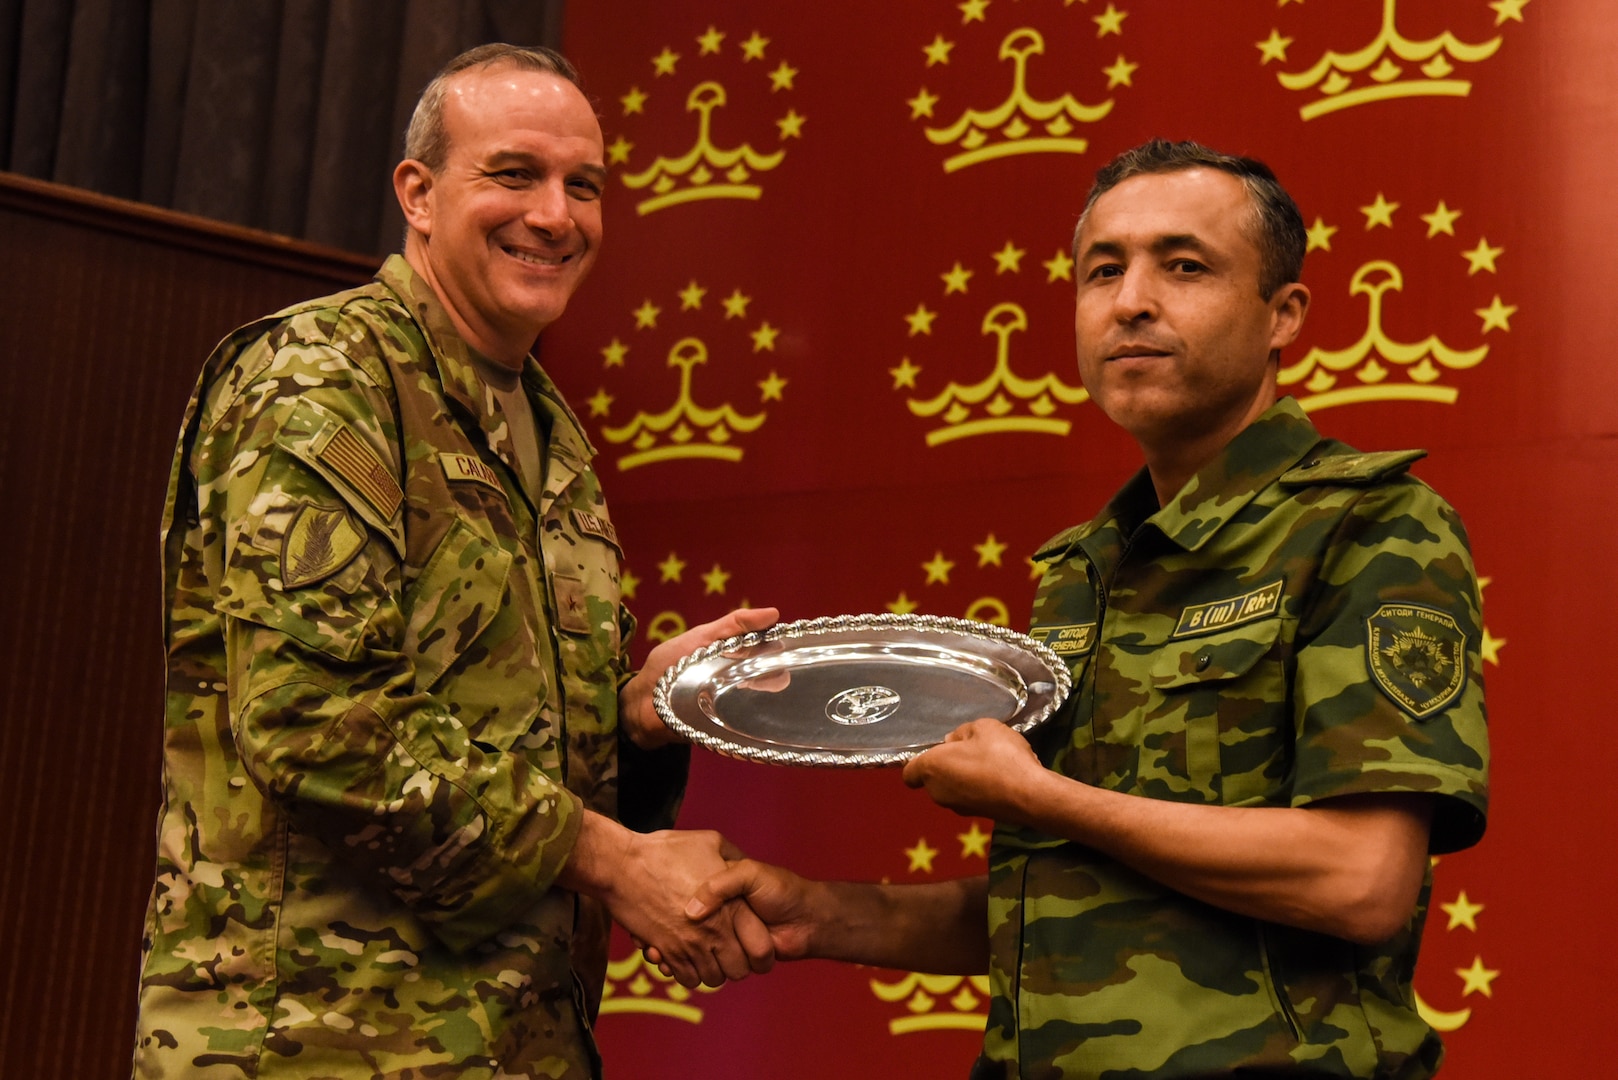 Brig. Gen. Maurizio D. Calabrese, deputy commanding general for intelligence at U.S. Central Command’s Over-the-Horizon Counterterrorism Headquarters, exchanges a gift at the close of the Regional Cooperation 22 exercise in Dushanbe, Tajikistan, Aug. 19, 2022. RC 22 is an annual, multinational U.S. Central Command-sponsored exercise conducted by U.S. forces with Central and South Asia nations.